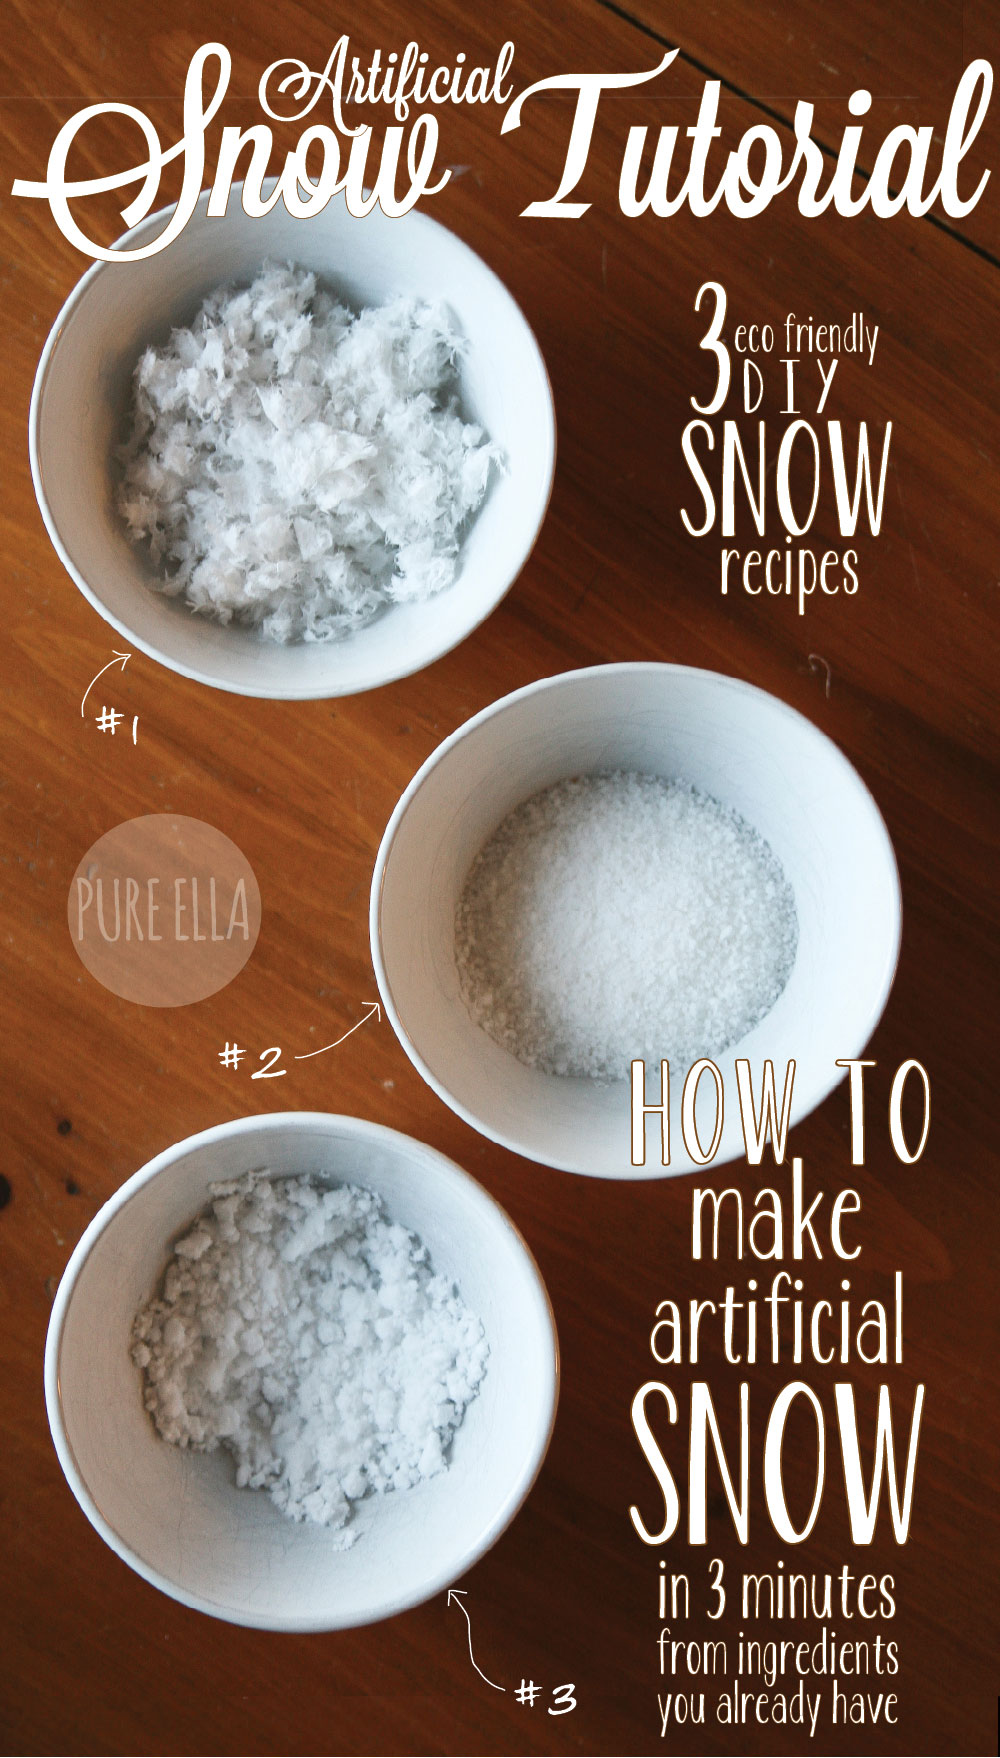 What's Artificial Snow and How Is It Made? - inChemistry